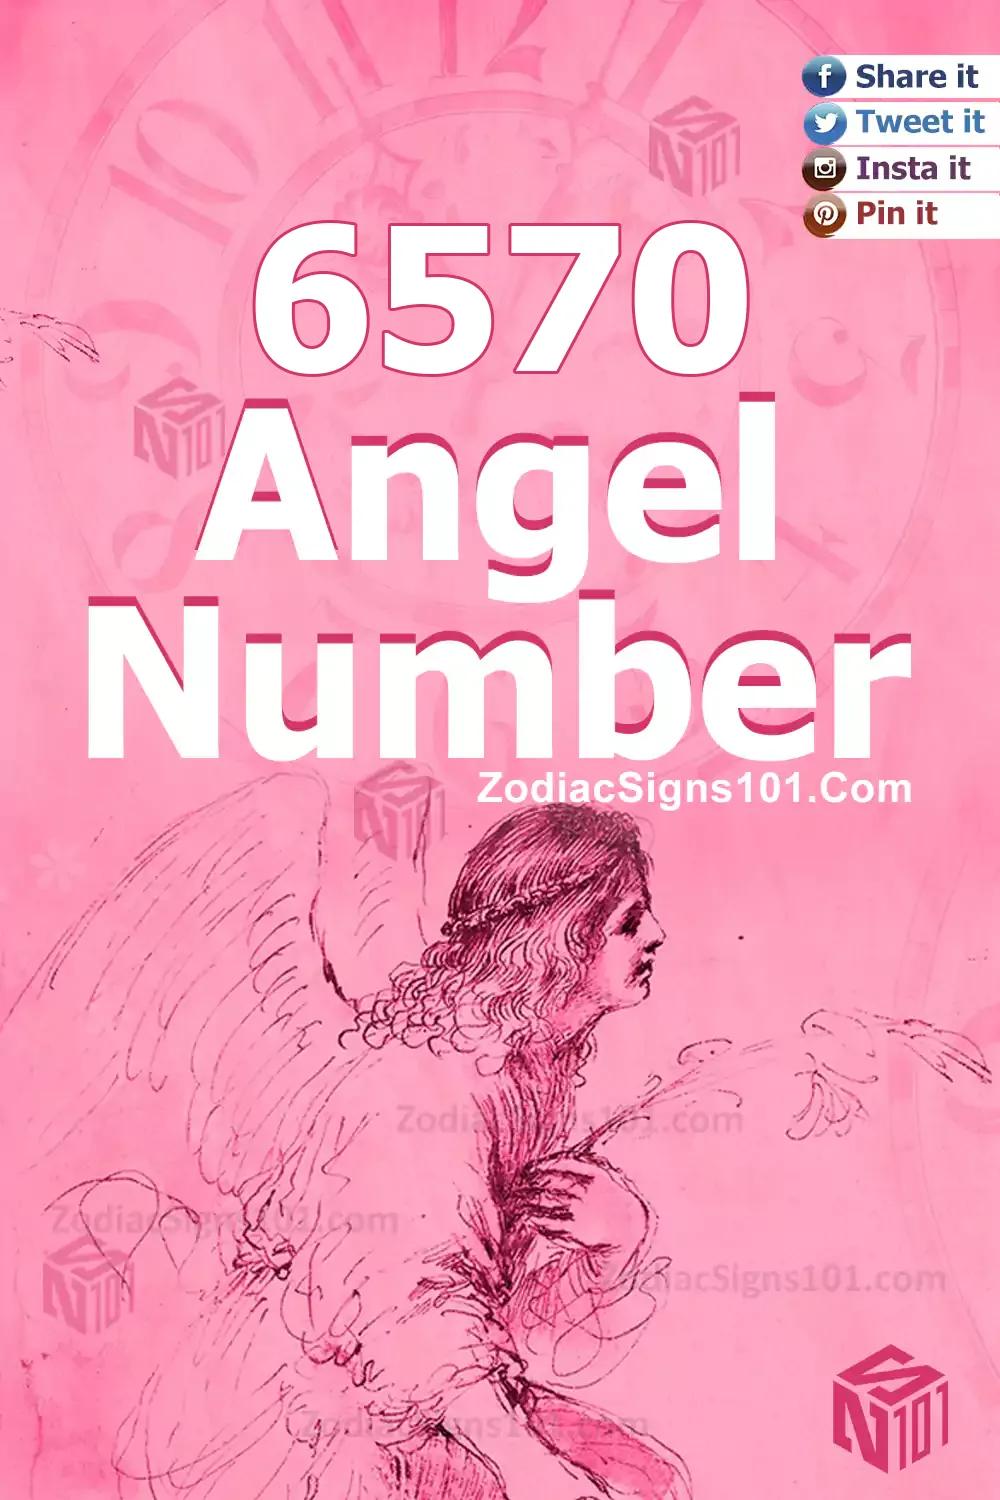 6570 Angel Number Meaning